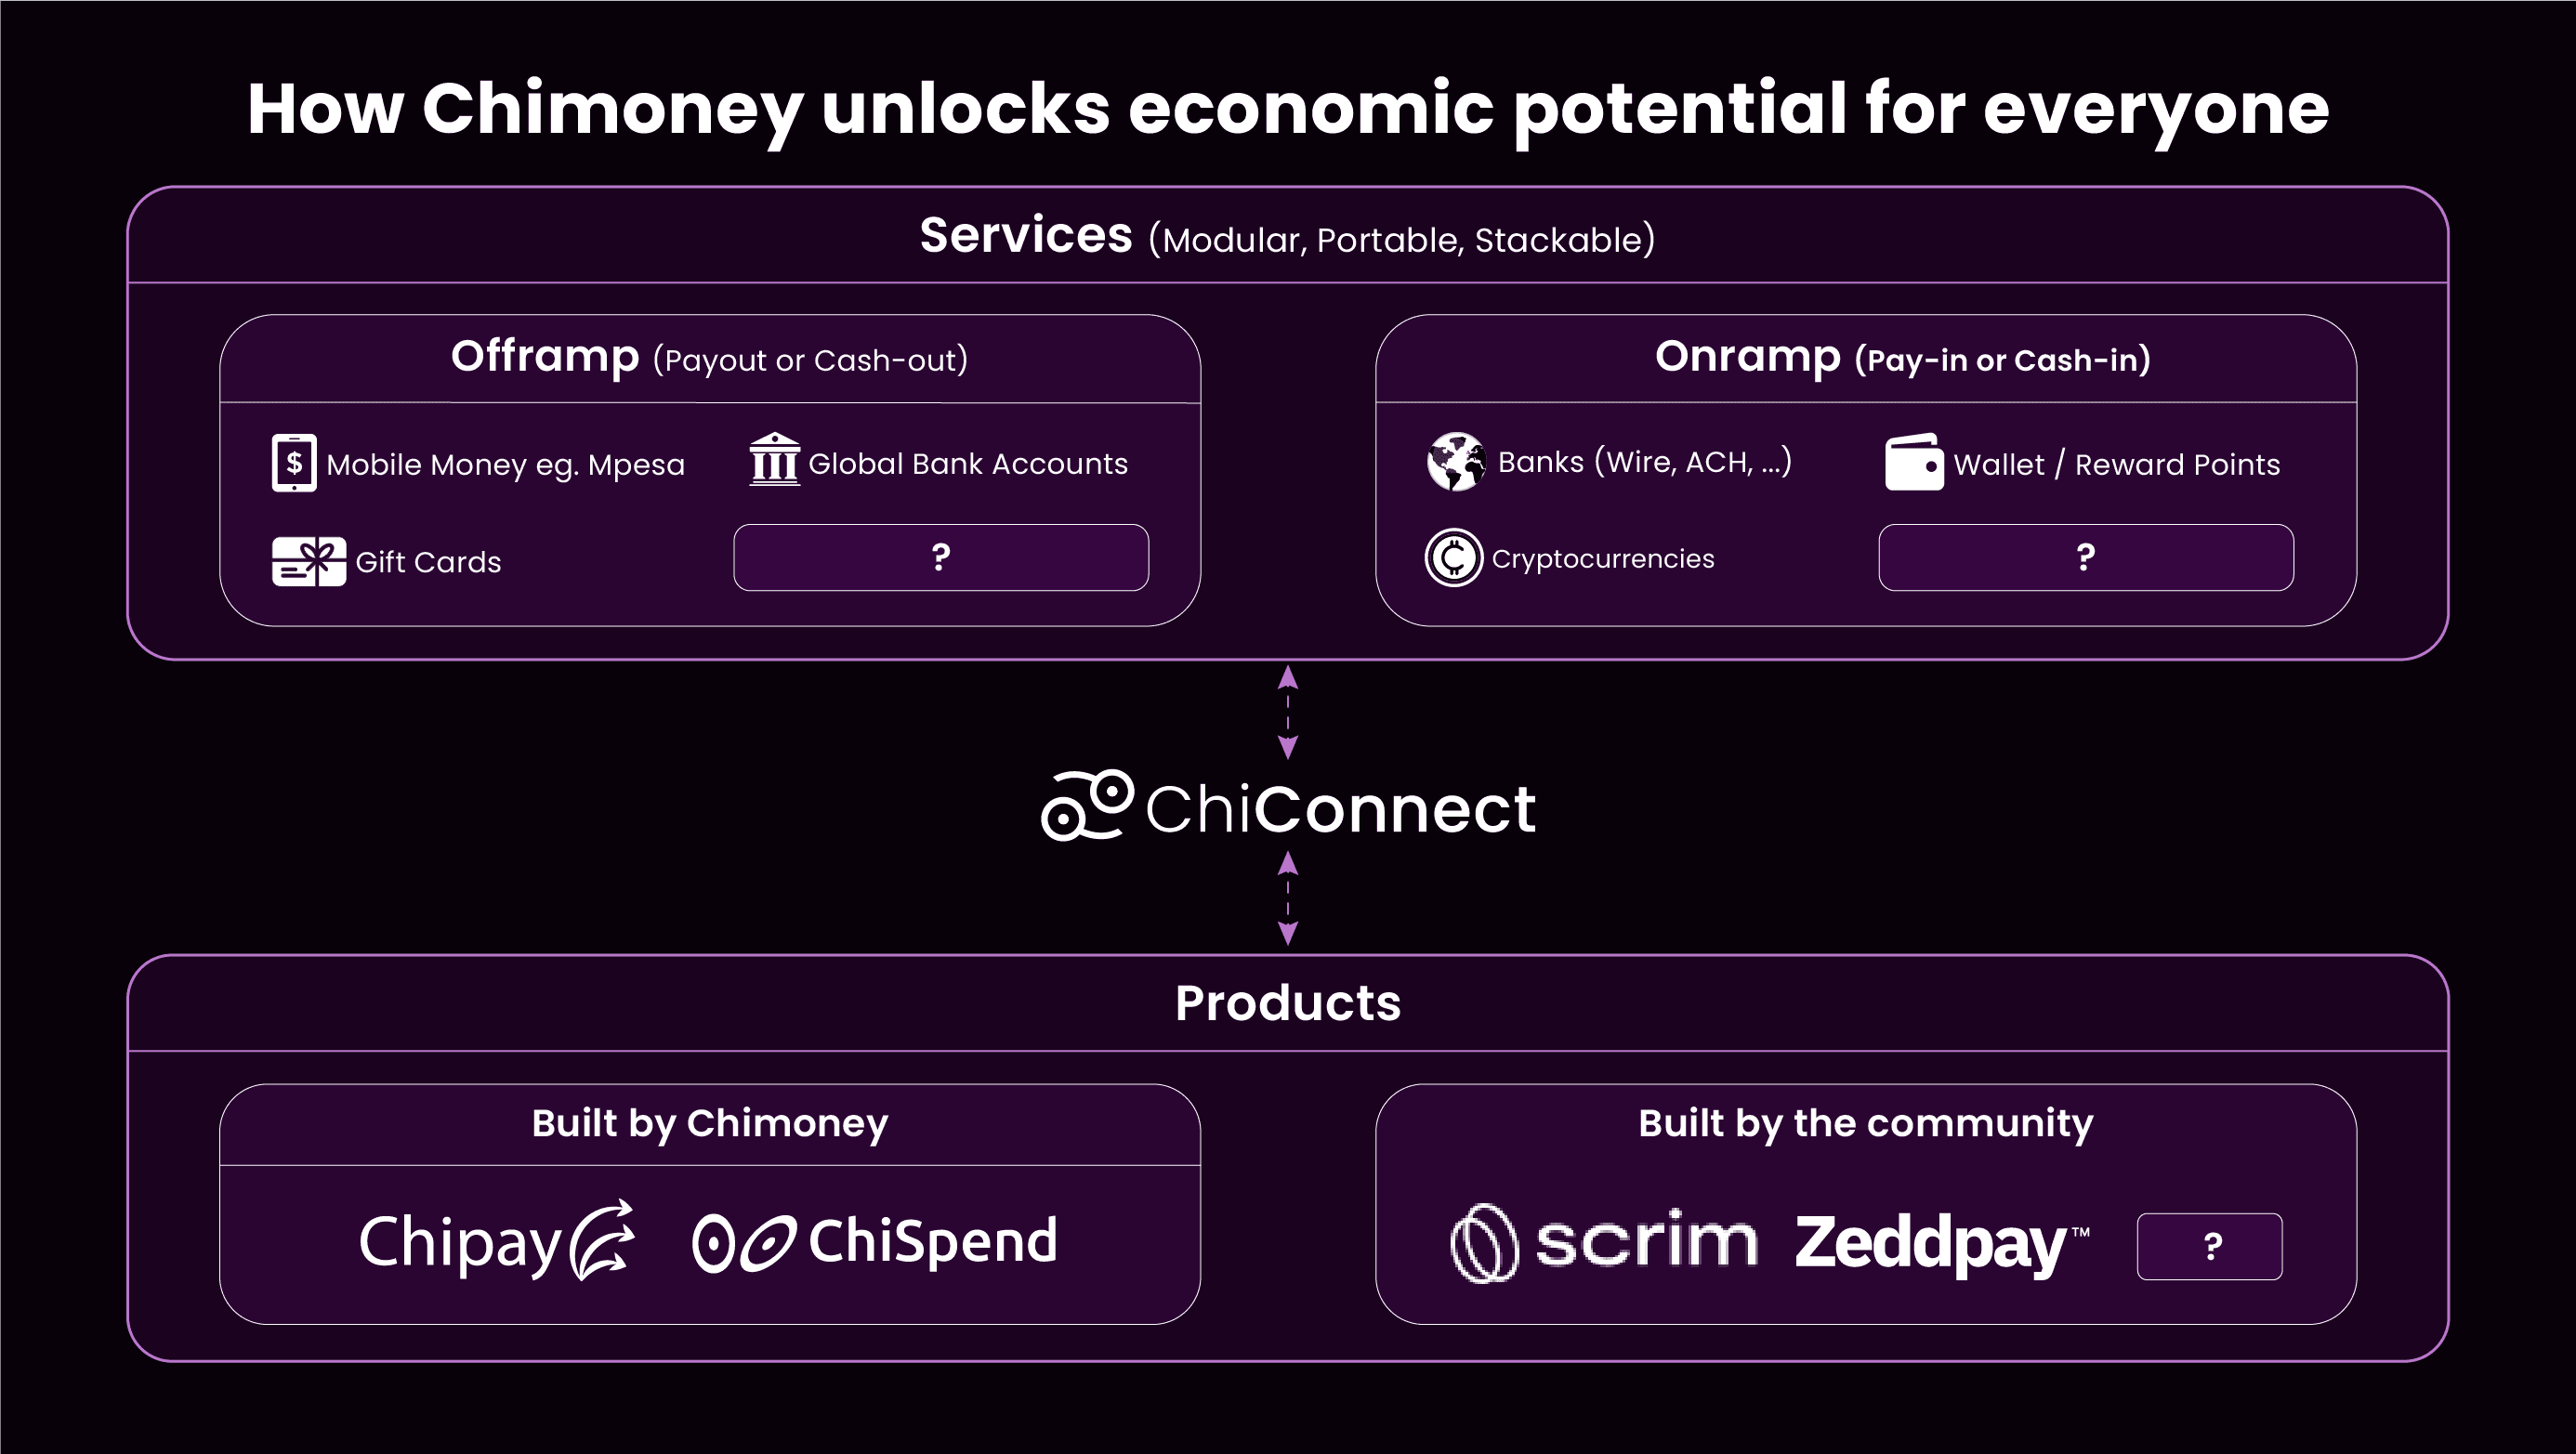 ChiConnect payment gateway - Connect with global services and offer more payout options